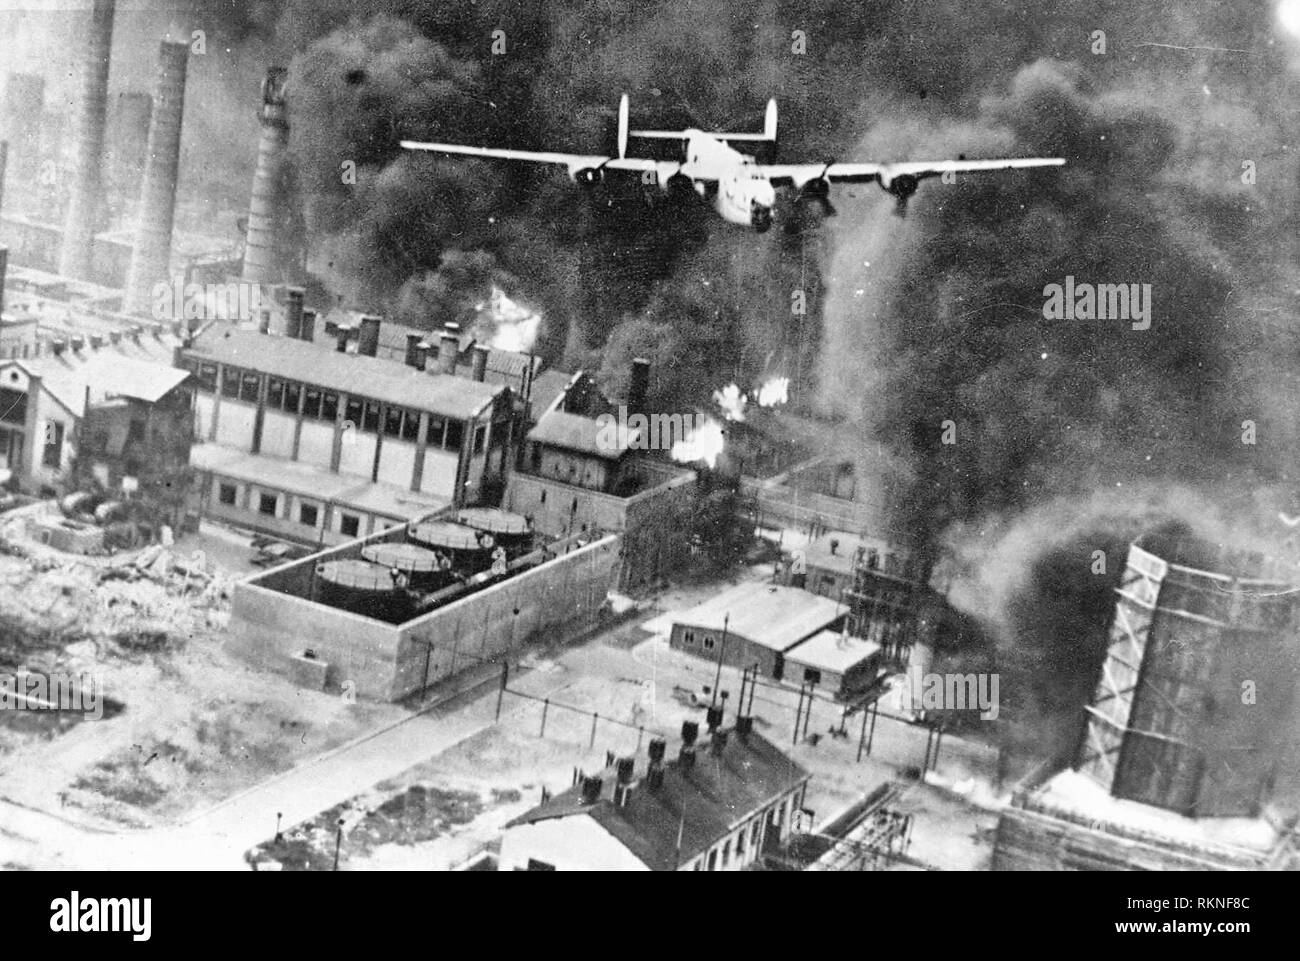 Air Raid Ploesti. A B-24 flying over a burning oil refinery at Ploesti, Rumania, 1 August 1943. Stock Photo